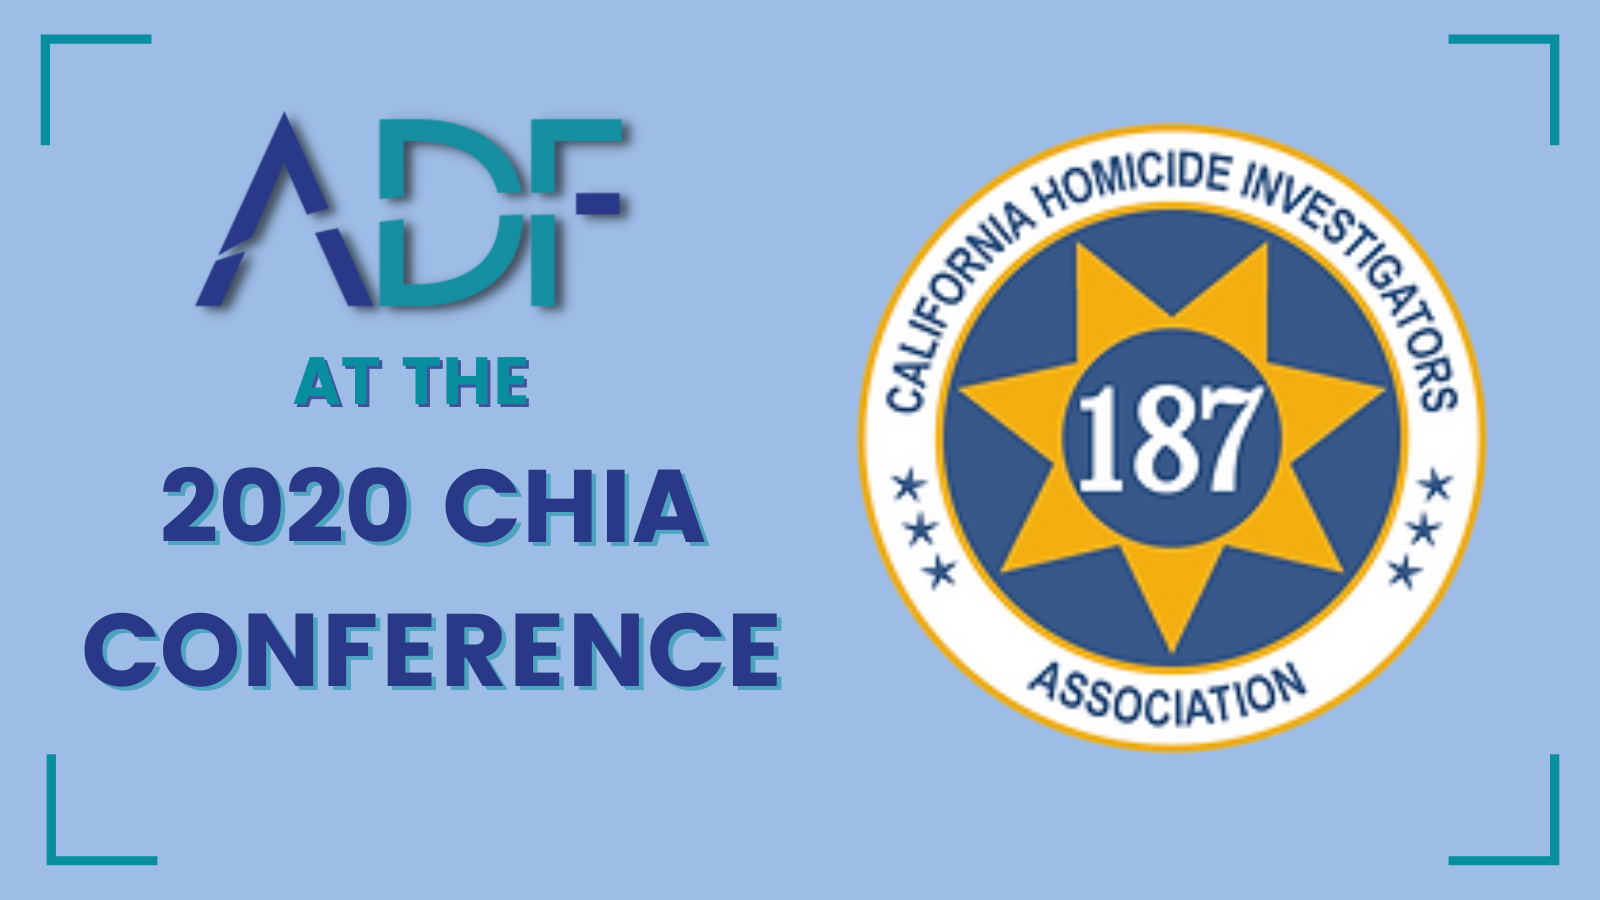 Digital Forensics at the California Homicide Investigation Conference